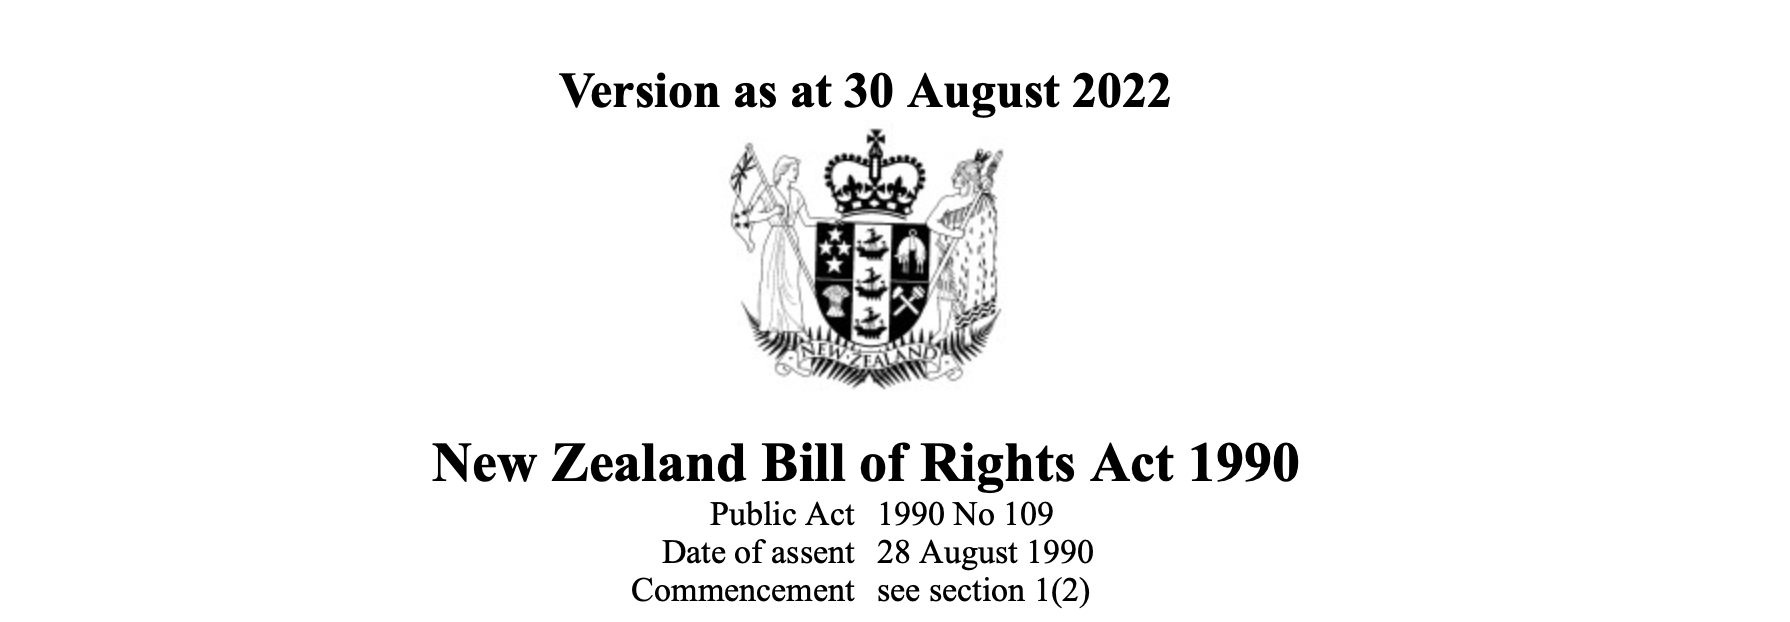 Complete Disregard for Bill of Rights - Recent OIA shows